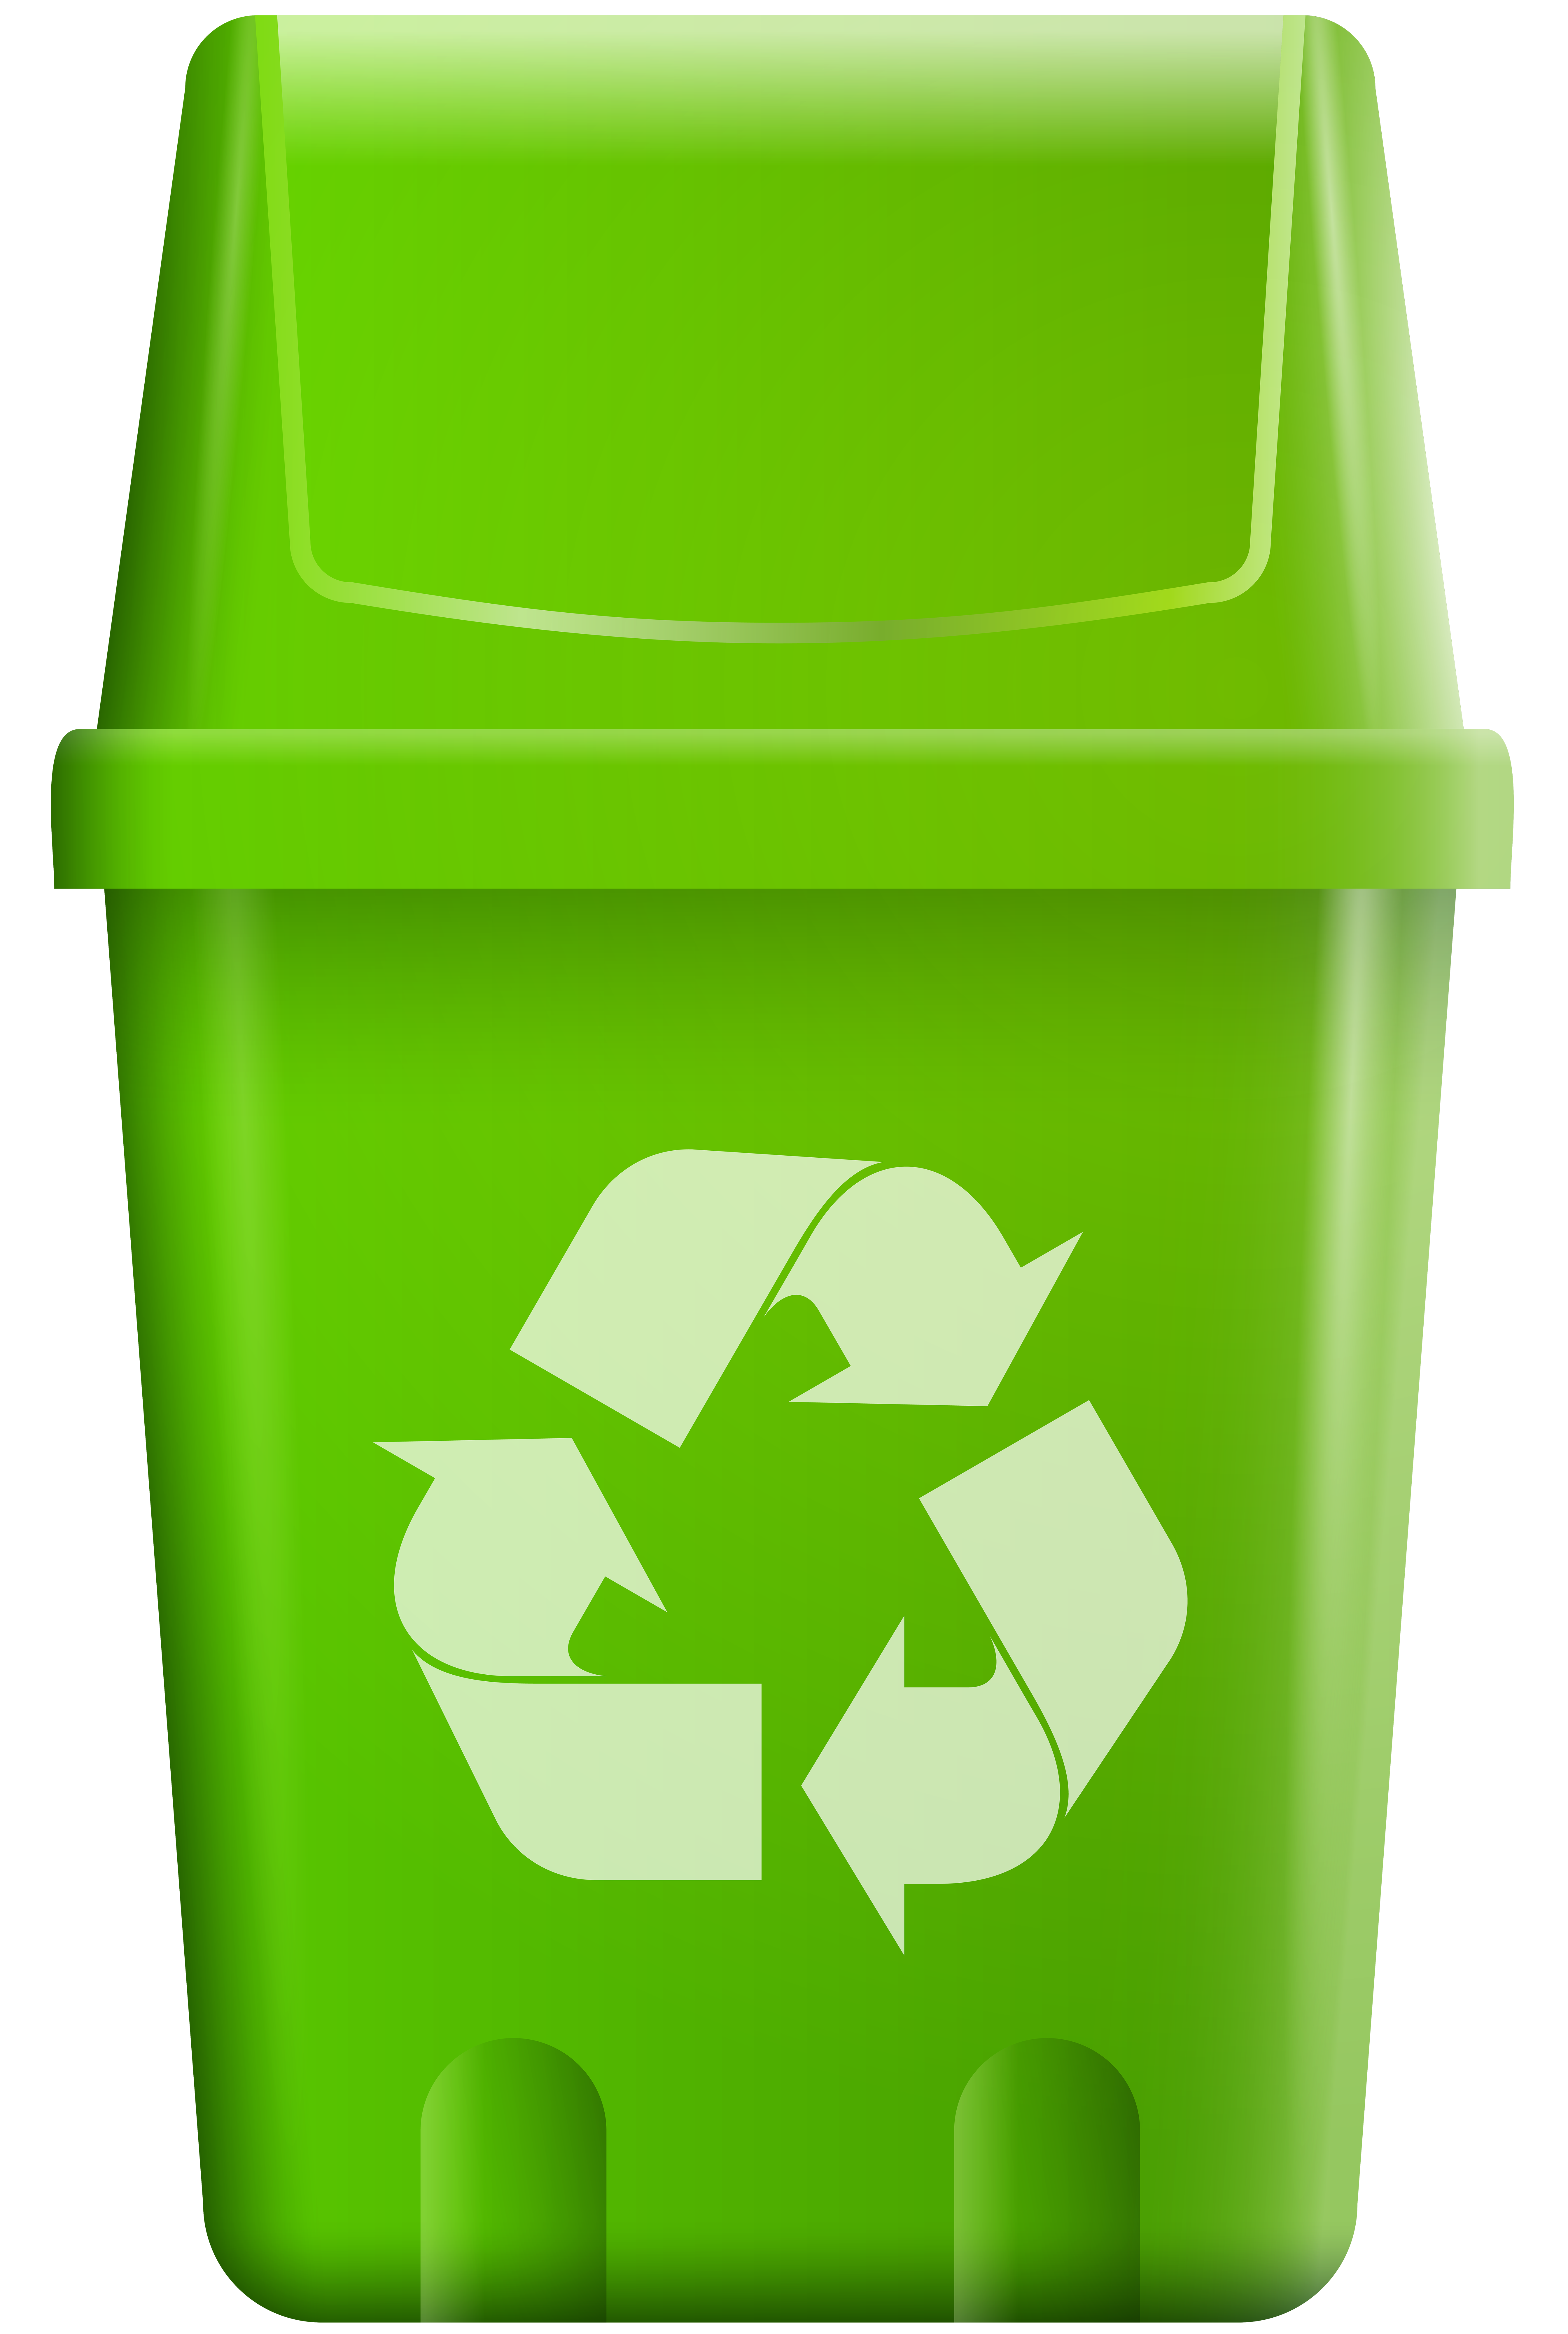 Trash Bin with Recycle Symbol PNG Clip Art - Best WEB Clipart